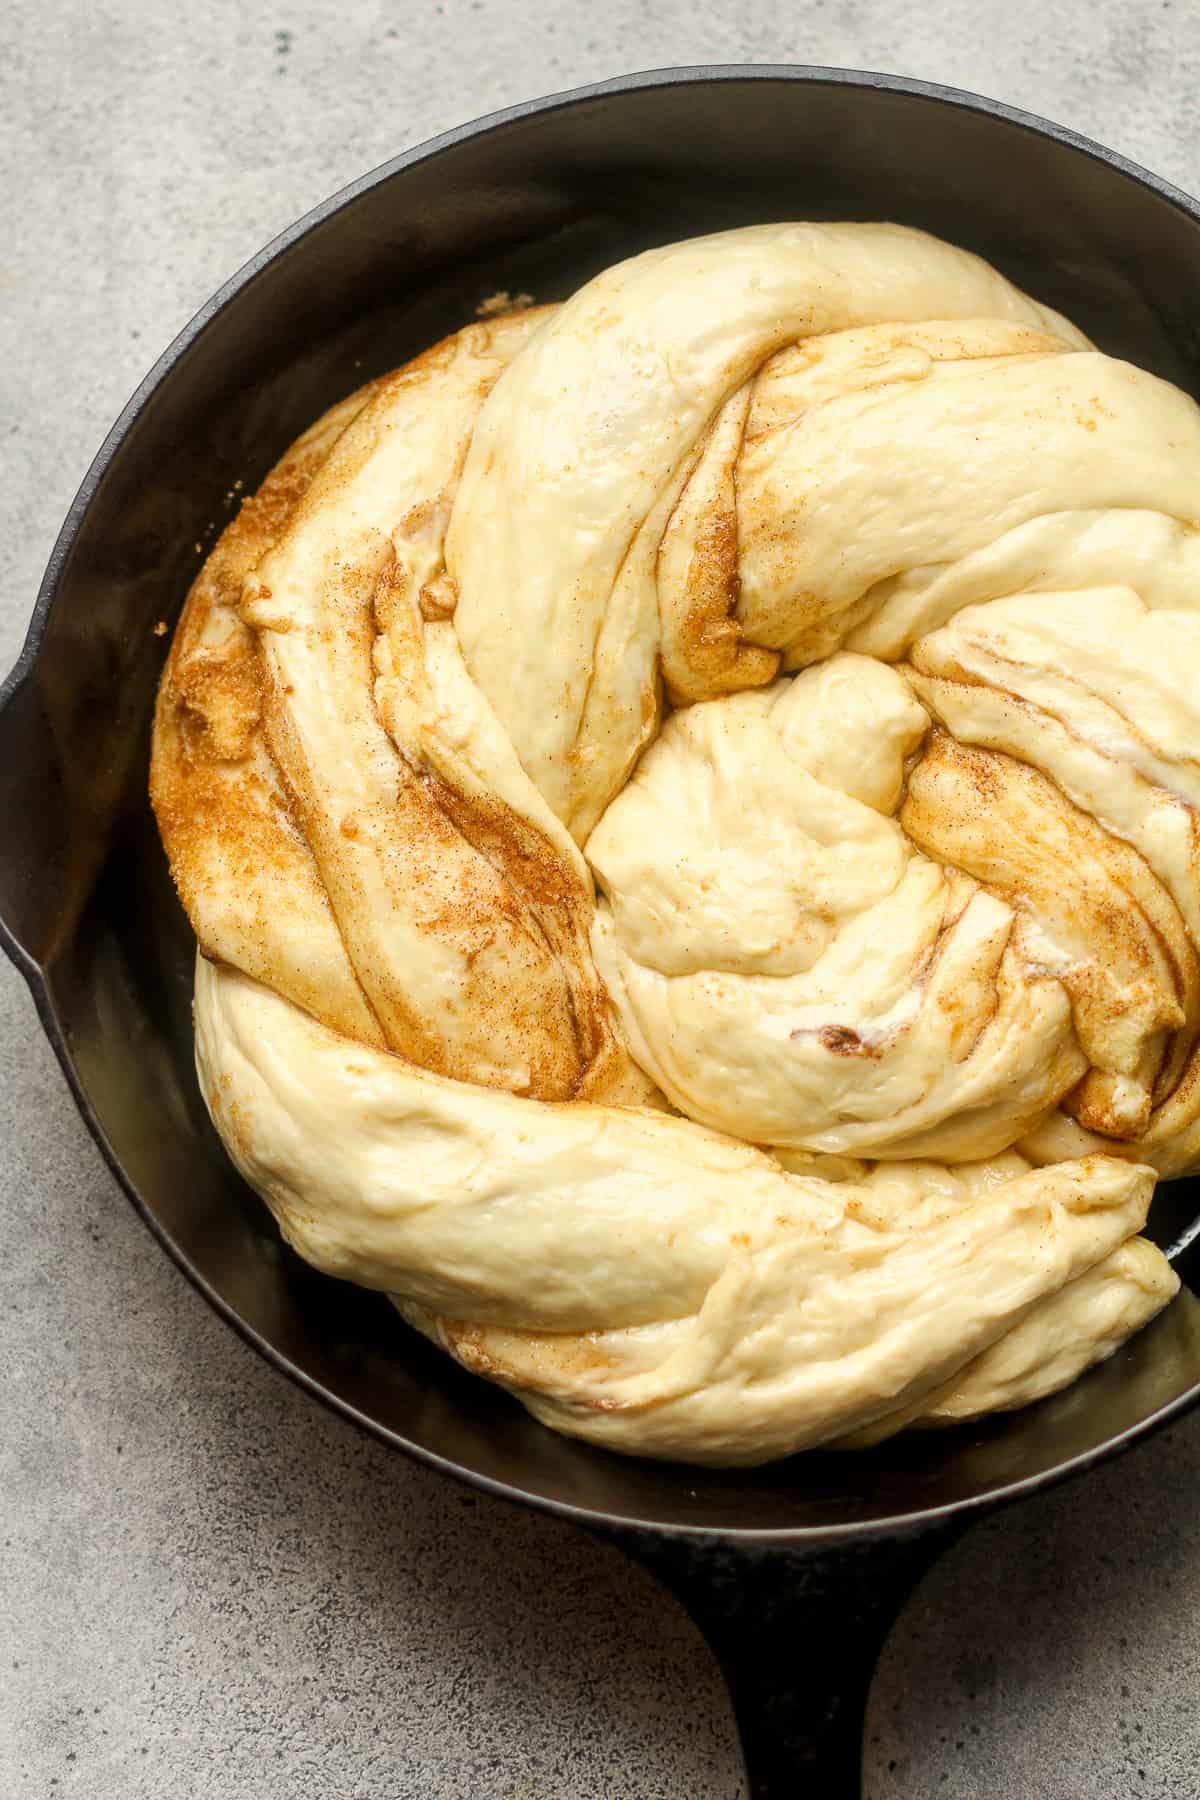 A cinnamon twist roll after placing in the skillet.